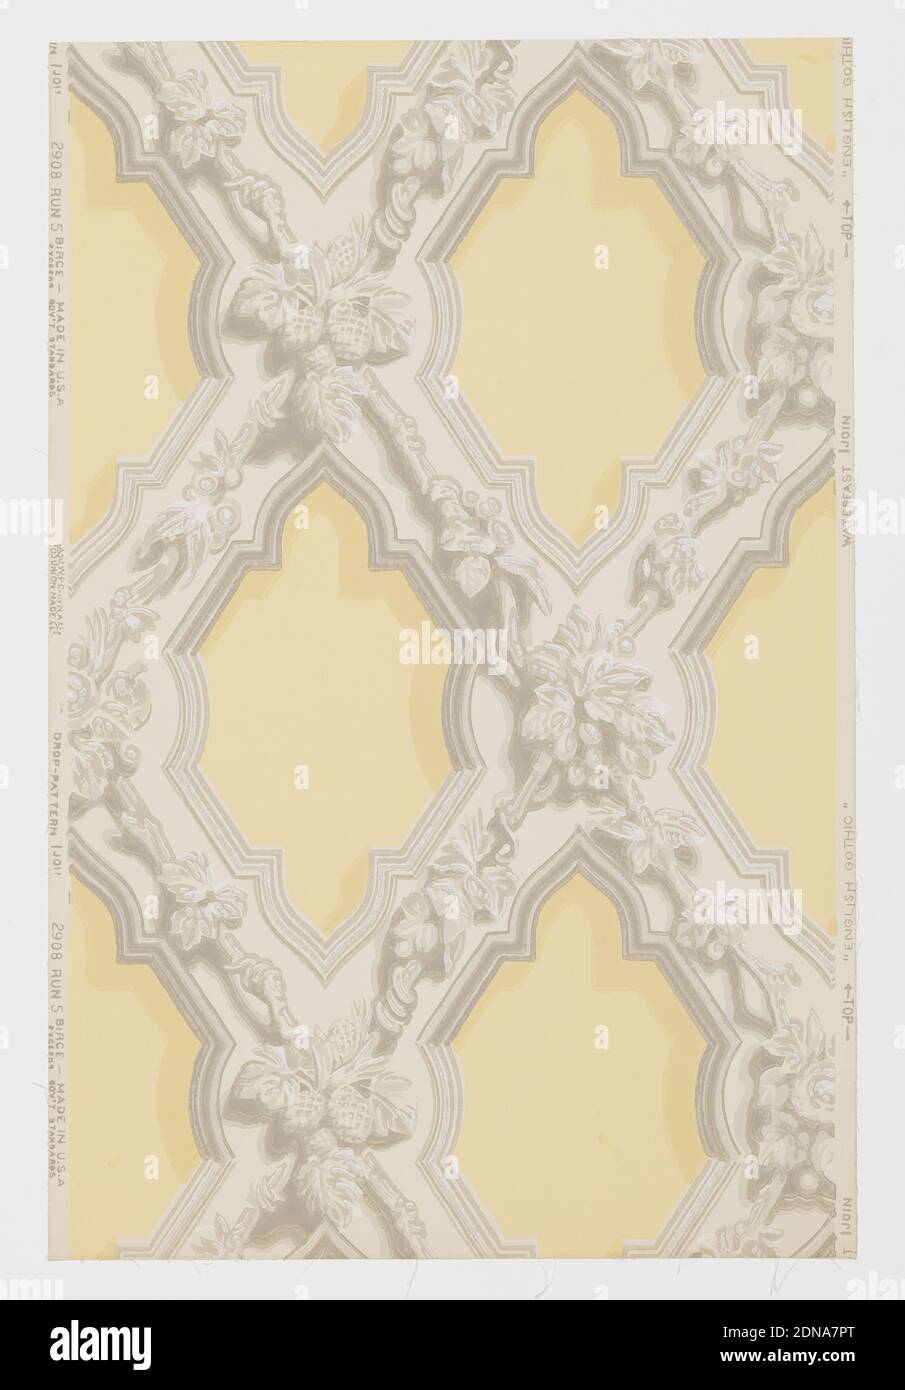 English Gothic, M.H. Birge & Sons Co., 1834, Machine printed on paper, Representing ornamental plaster form of decoration in English Gothic used in the first half of the 19th century. Composed of criss-crossing wide bands ornamented with leaves, flowers, nuts and fruits. Bands are edged with simulated moldings. A reproduction of an old wallpaper from the walls of the front entry of John Sible's house, Hancock Street, Salem, Massachusetts. It was put on walls in 1858. Printed on reverse side: 'No. 295 CB'. Printed in grisaille on pale gold field. Not original colors., Buffalo, New York, USA Stock Photo